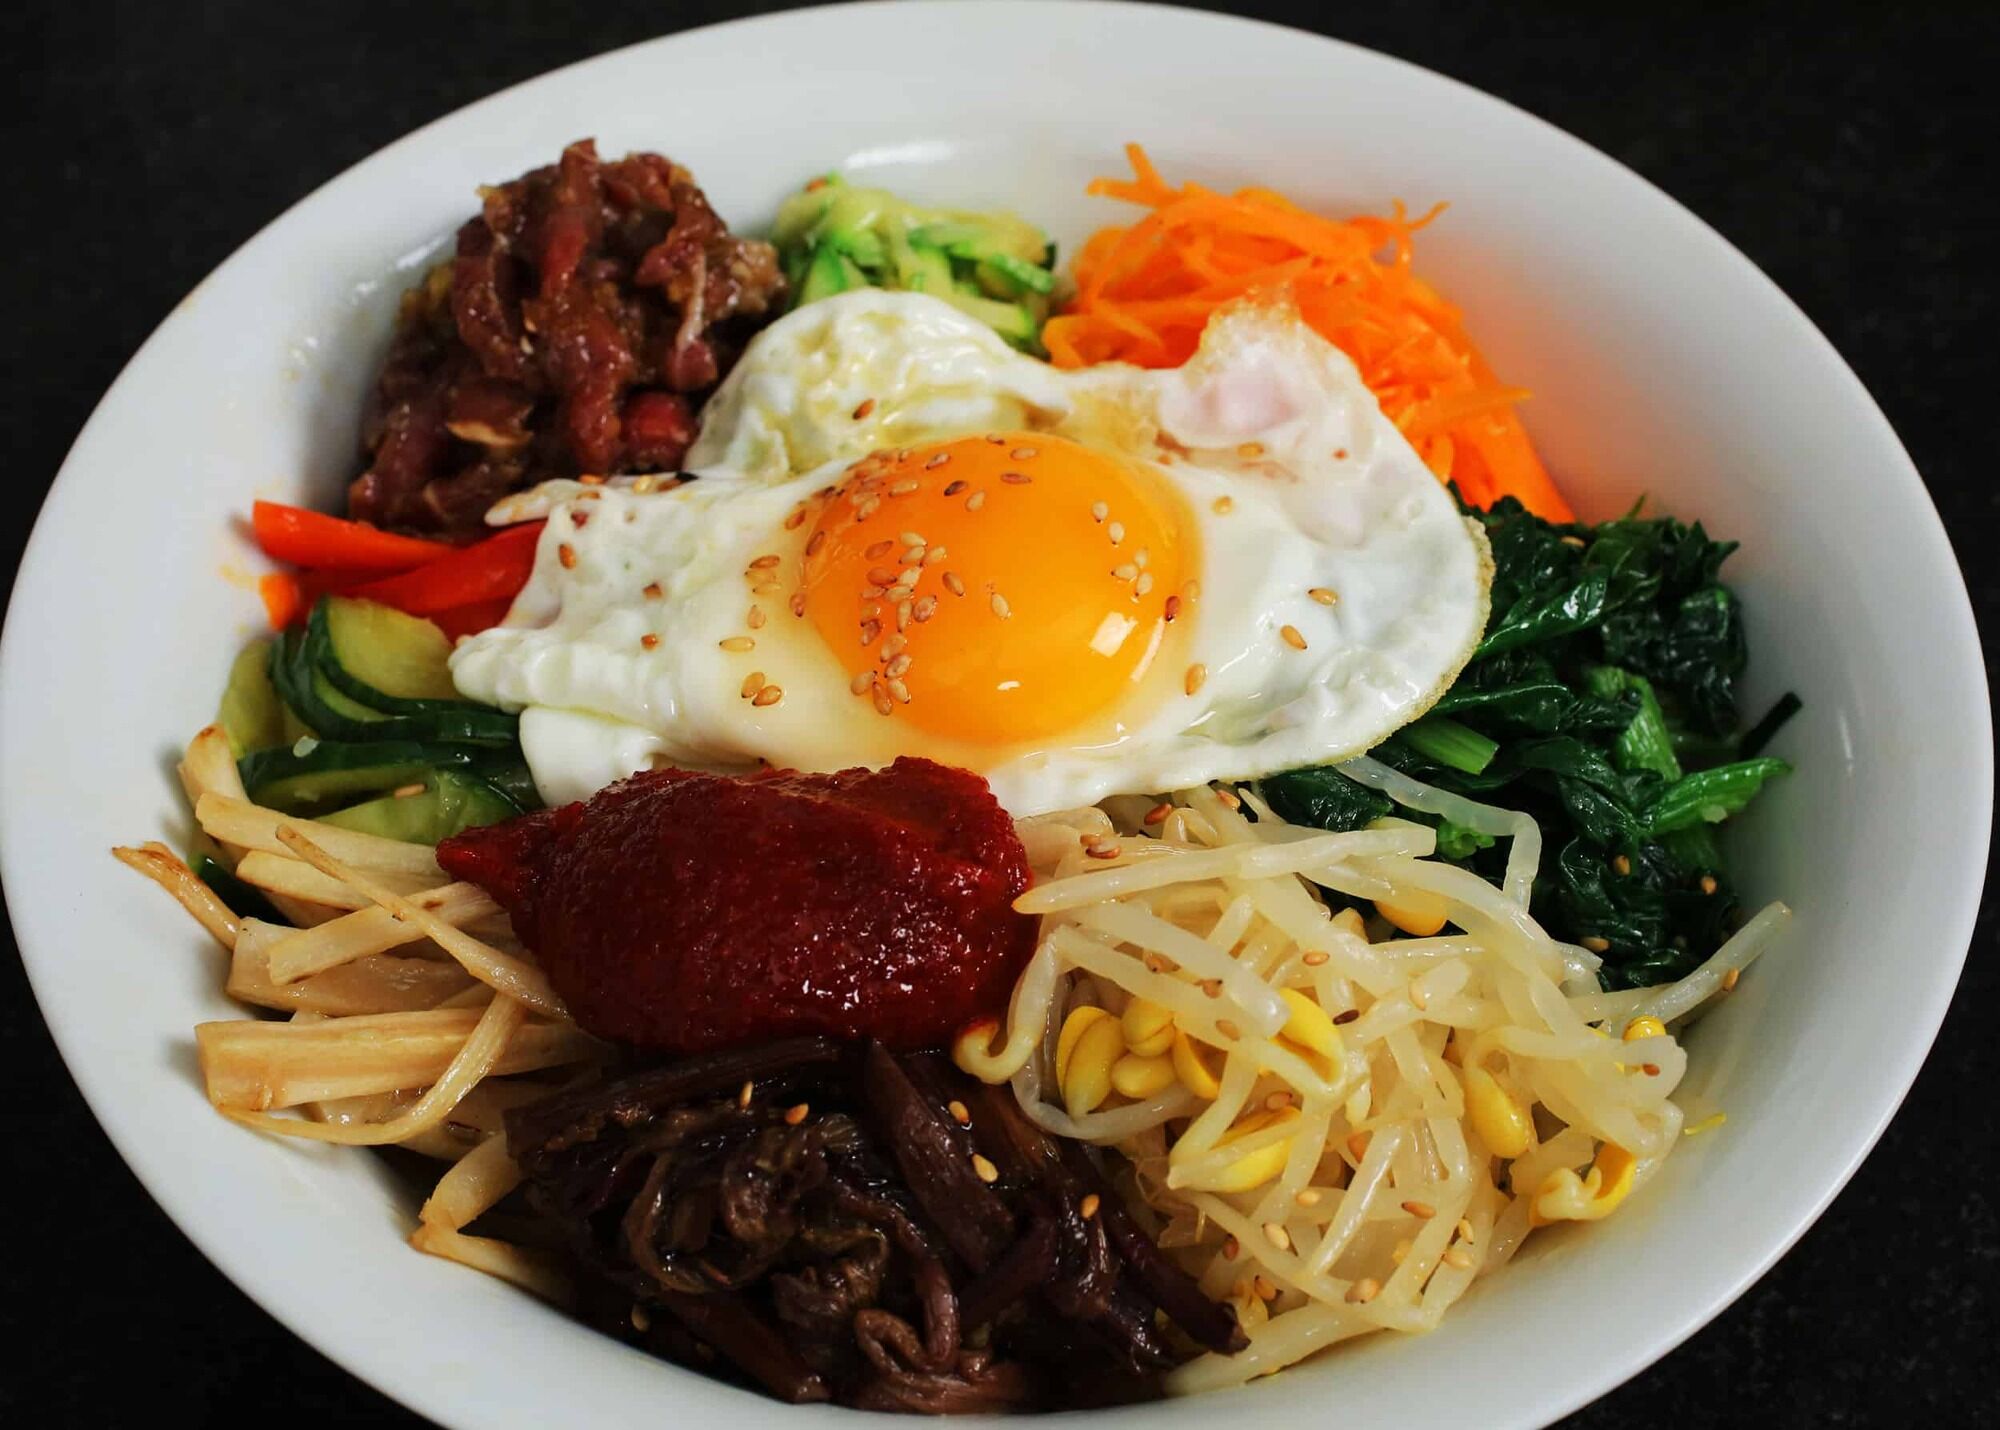 From papeda to bibimbap: the top 5 culinary trends of Google 2023 are named